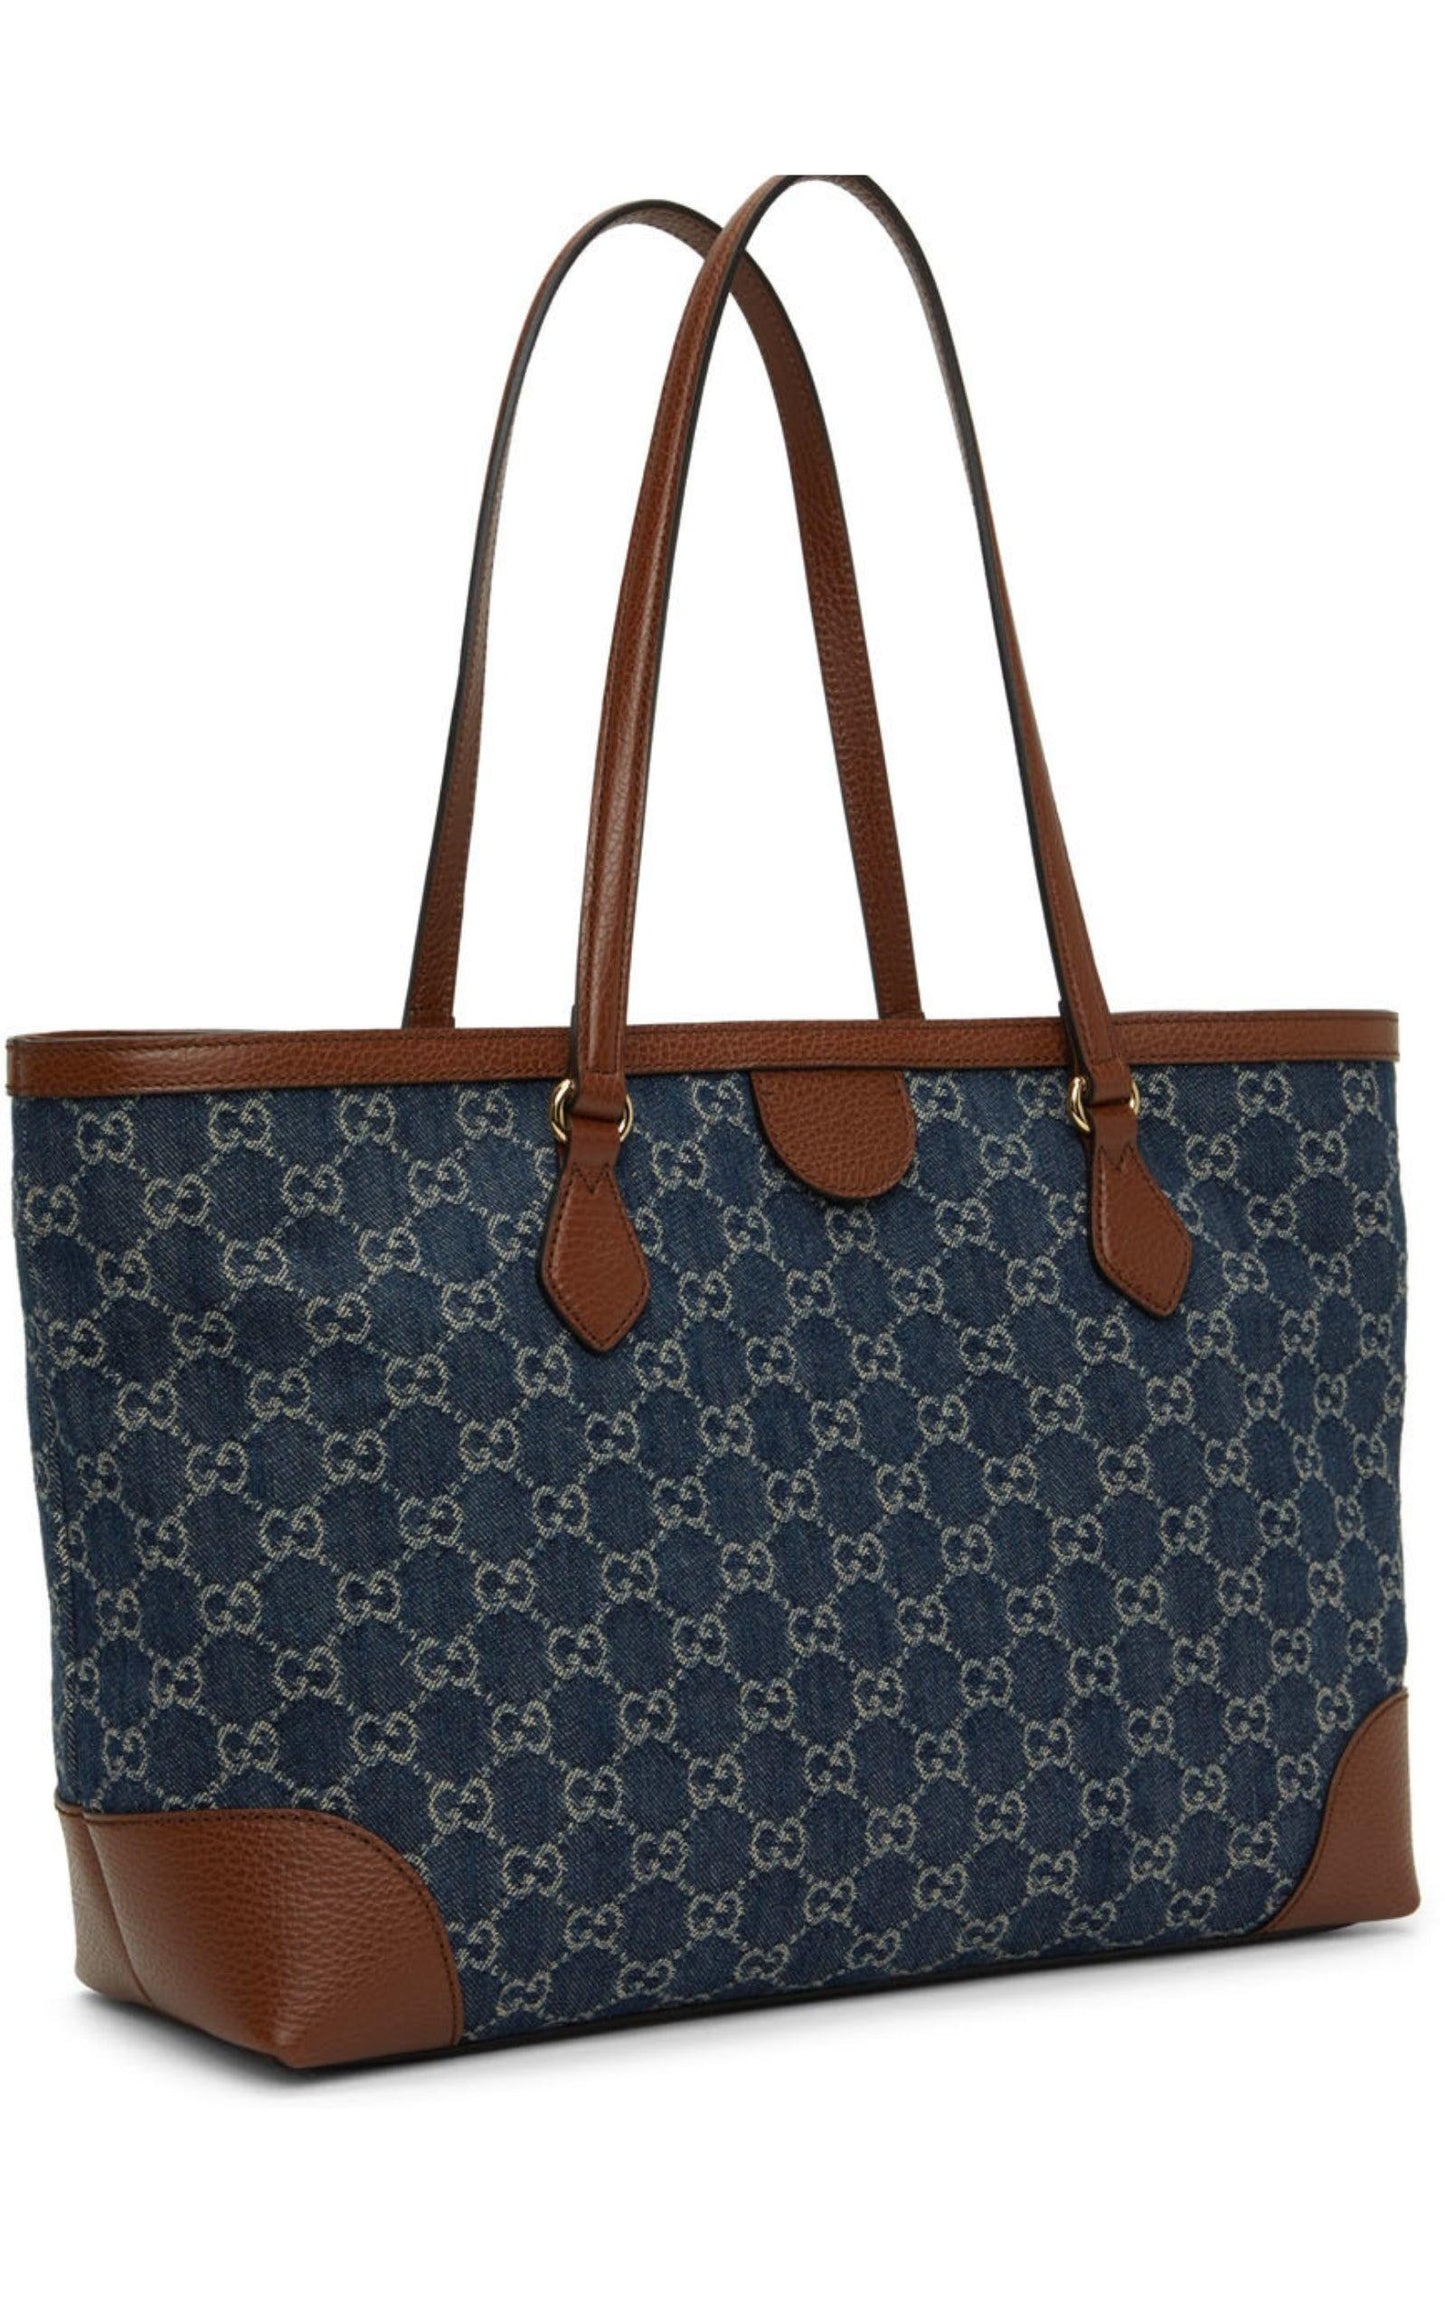 Ophidia GG Medium Tote in Brown - Gucci